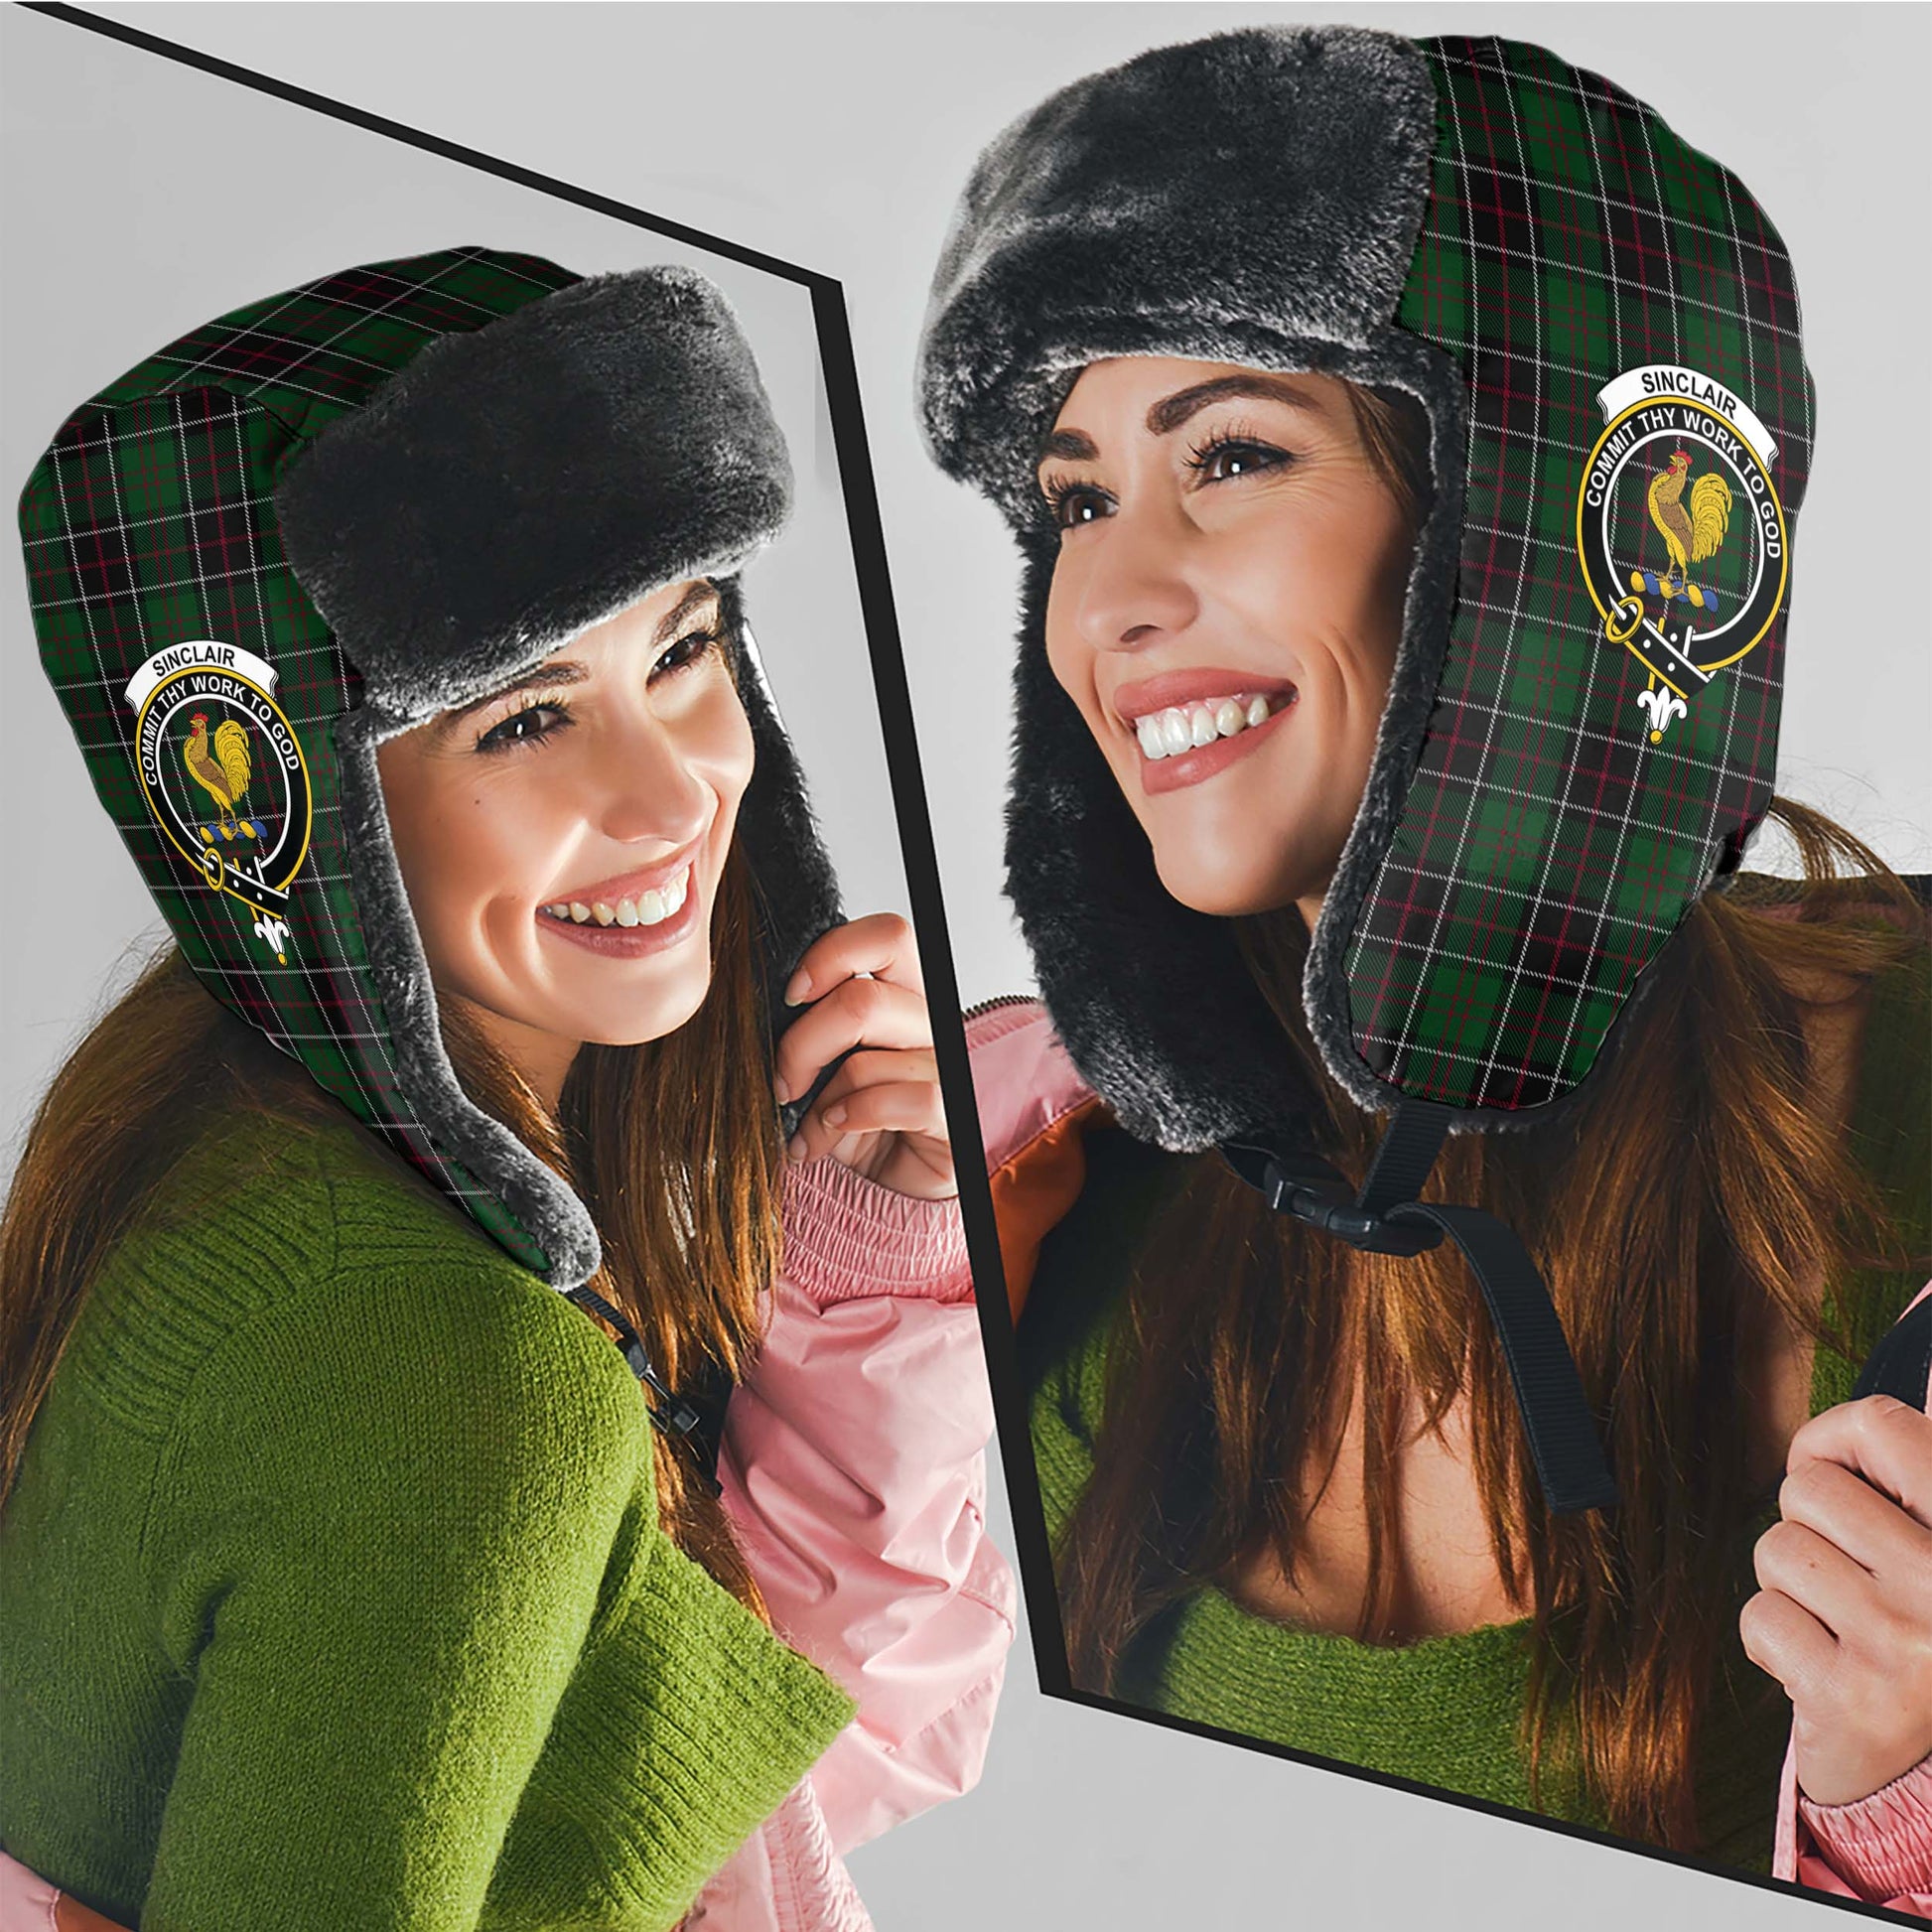 Sinclair Hunting Tartan Winter Trapper Hat with Family Crest - Tartanvibesclothing